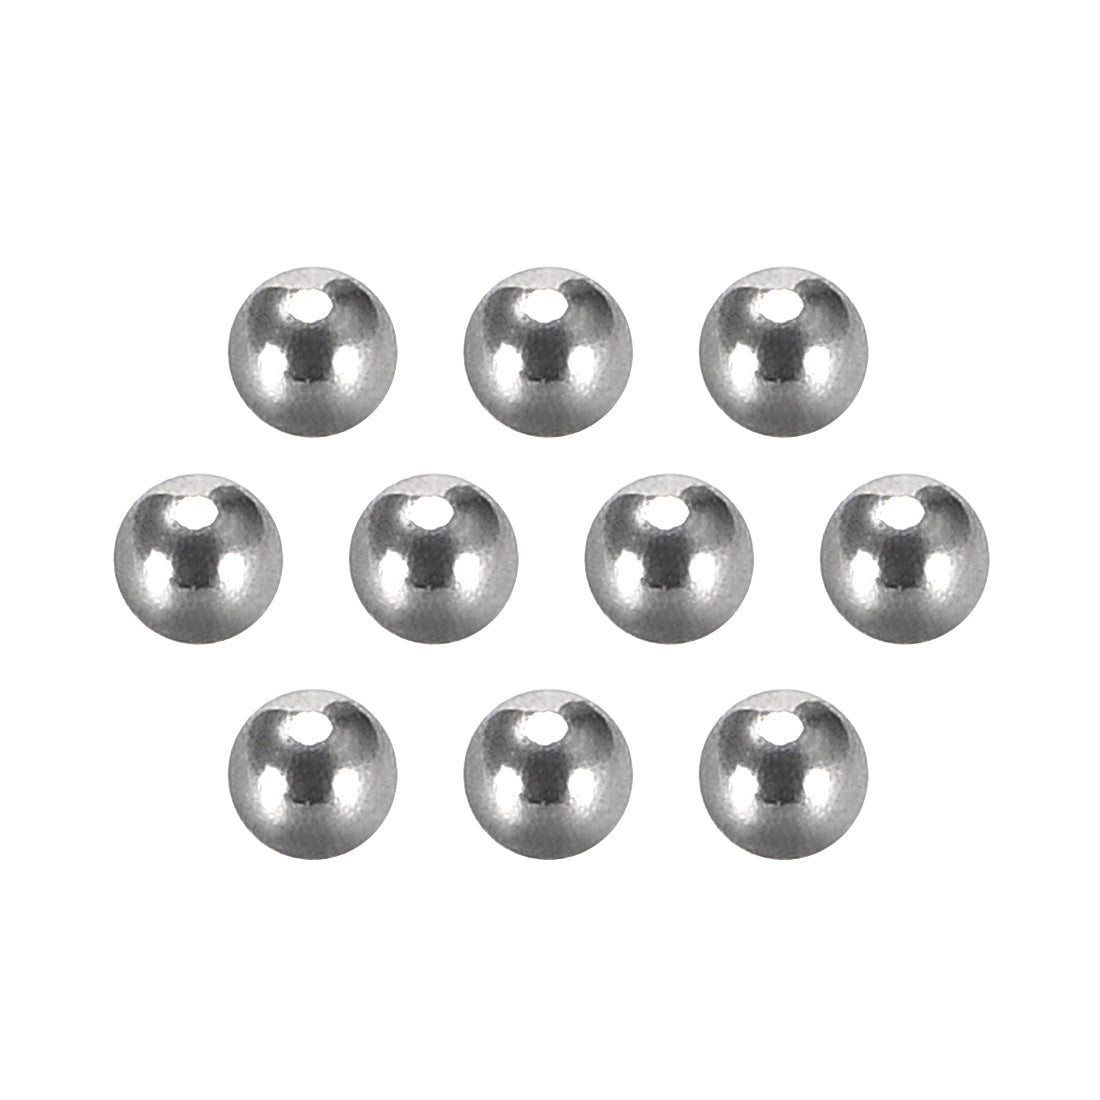 Uxcell Uxcell Precision 304 Stainless Steel Bearing Balls 9/64 Inch G5 10pcs